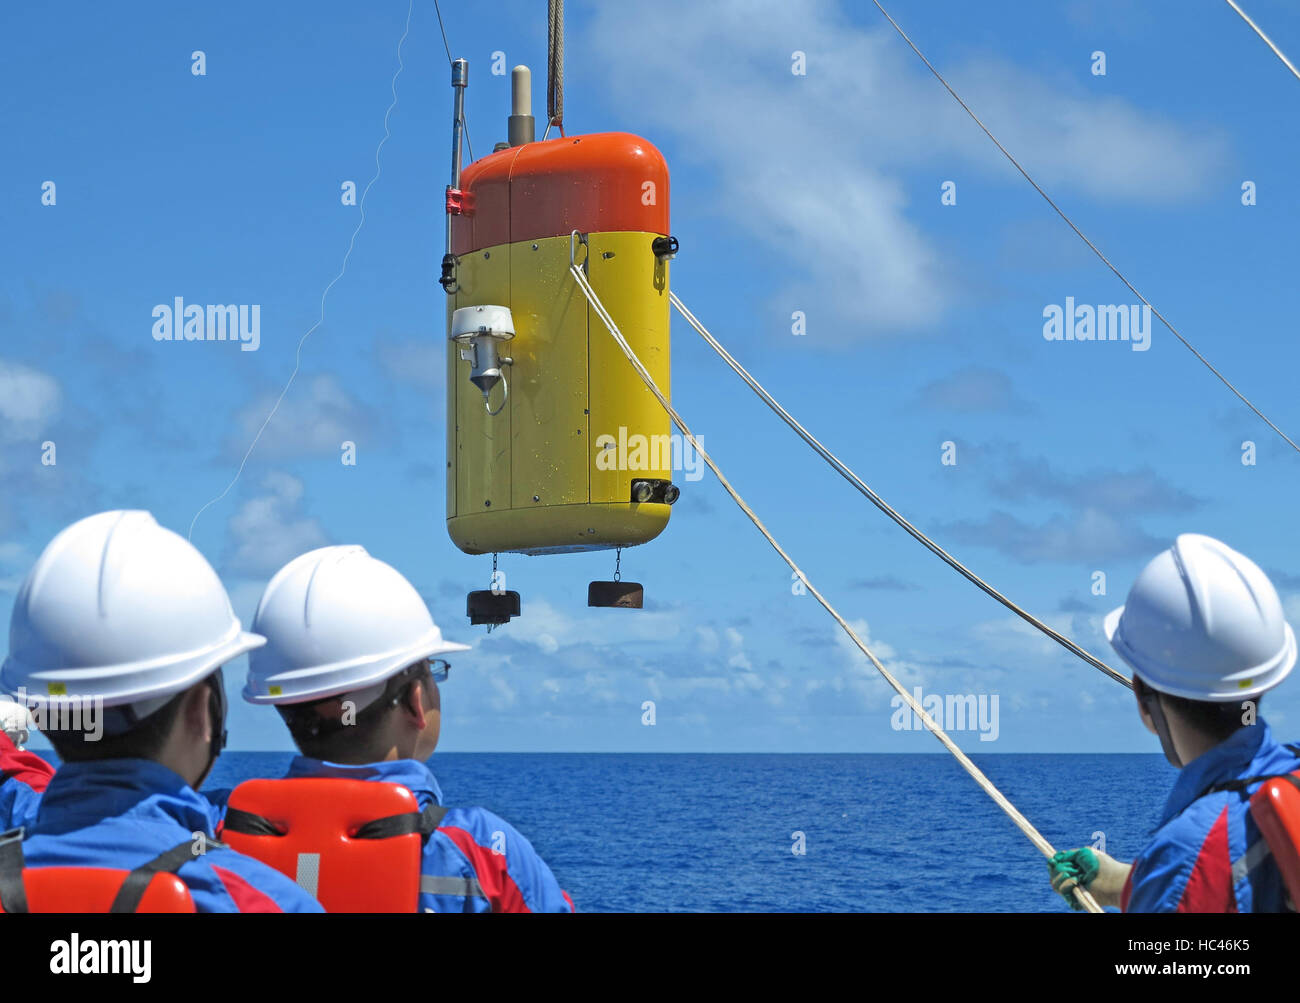 (161208) -- BEIJING, Dec. 8, 2016 (Xinhua) -- China's unmanned submersible 'Haidou-1' prepares to dive into waters near the Mariana Trench in the West Pacific, the deepest area in the world, during a scientific expedition on July 1, 2016. During the trip, the submersible dived to a depth of 10,767 meters, setting a new record for the country. It is another milestone in China's maritime science journey after Jiaolong manned submersible. In June 2012, Jiaolong reached a depth of 7,062 meters at the Mariana Trench, the deepest of China's manned submersible. China achieved major breakthroughs in s Stock Photo